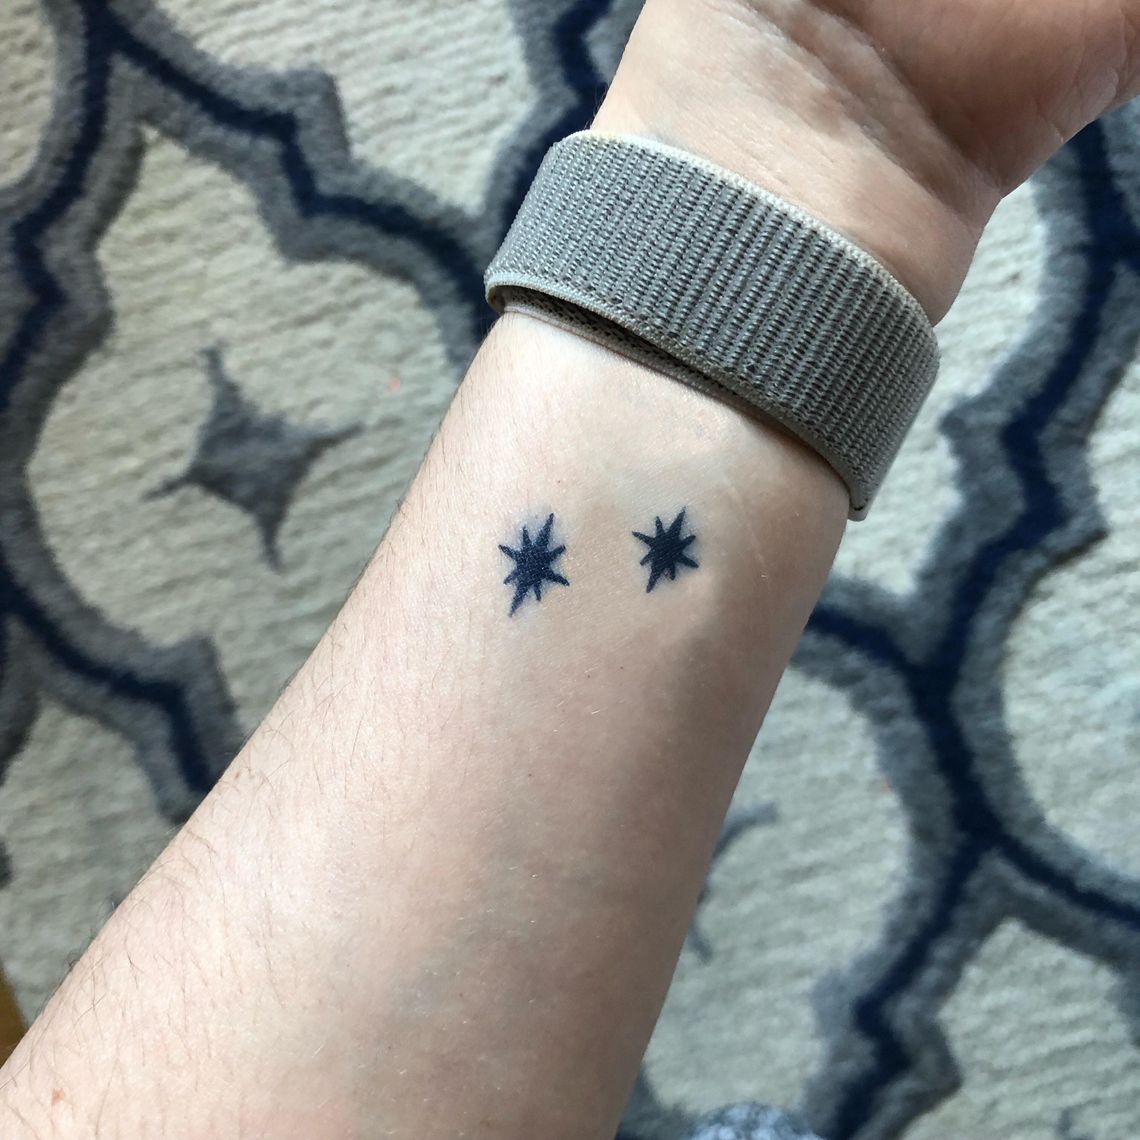 Inkbox Temporary Tattoo Review 2019 | The Strategist